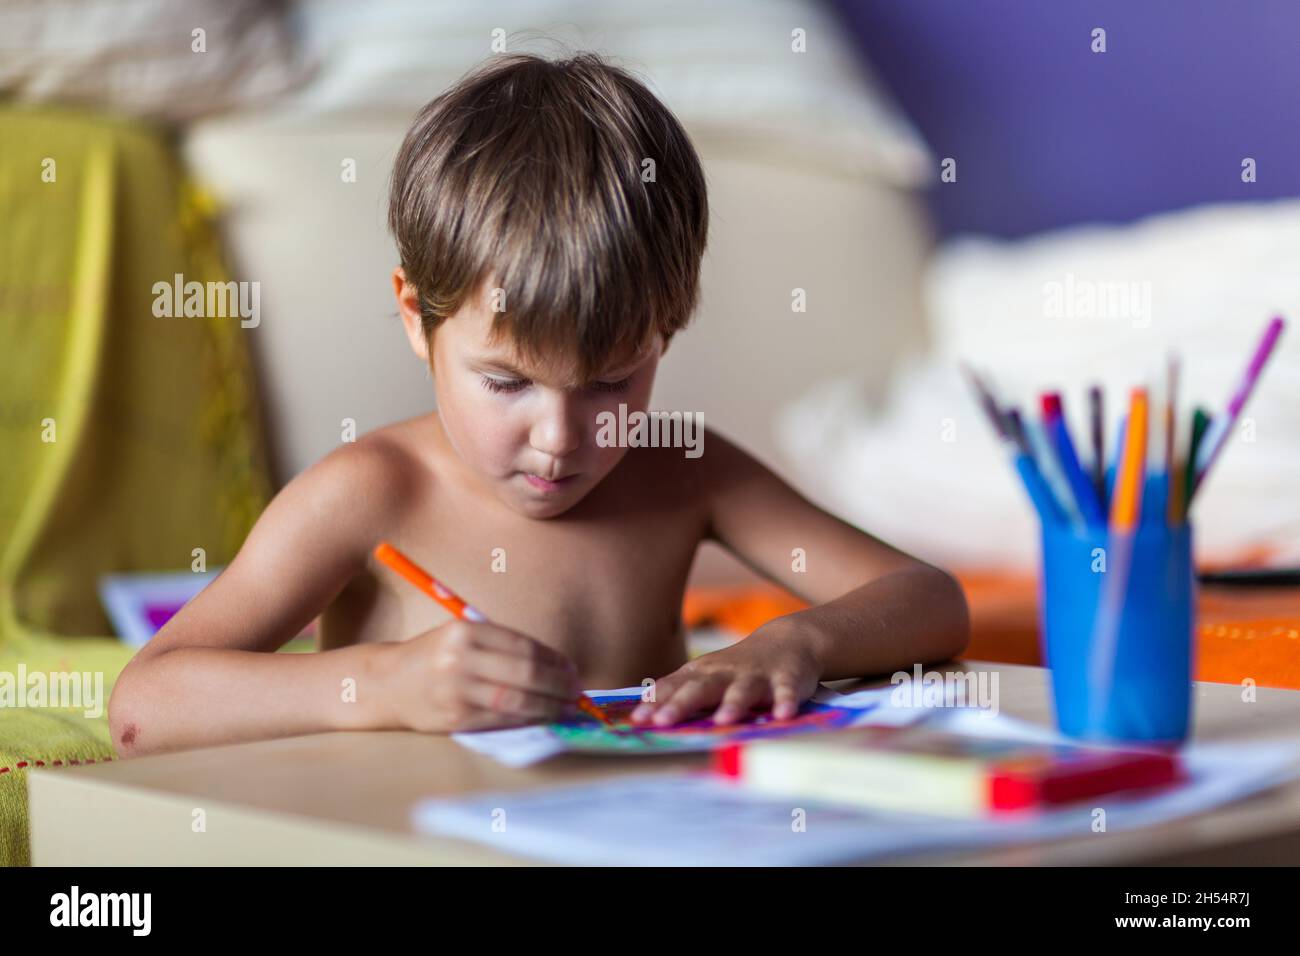 A boy is looking and singing while painting on a white paper Stock Photo